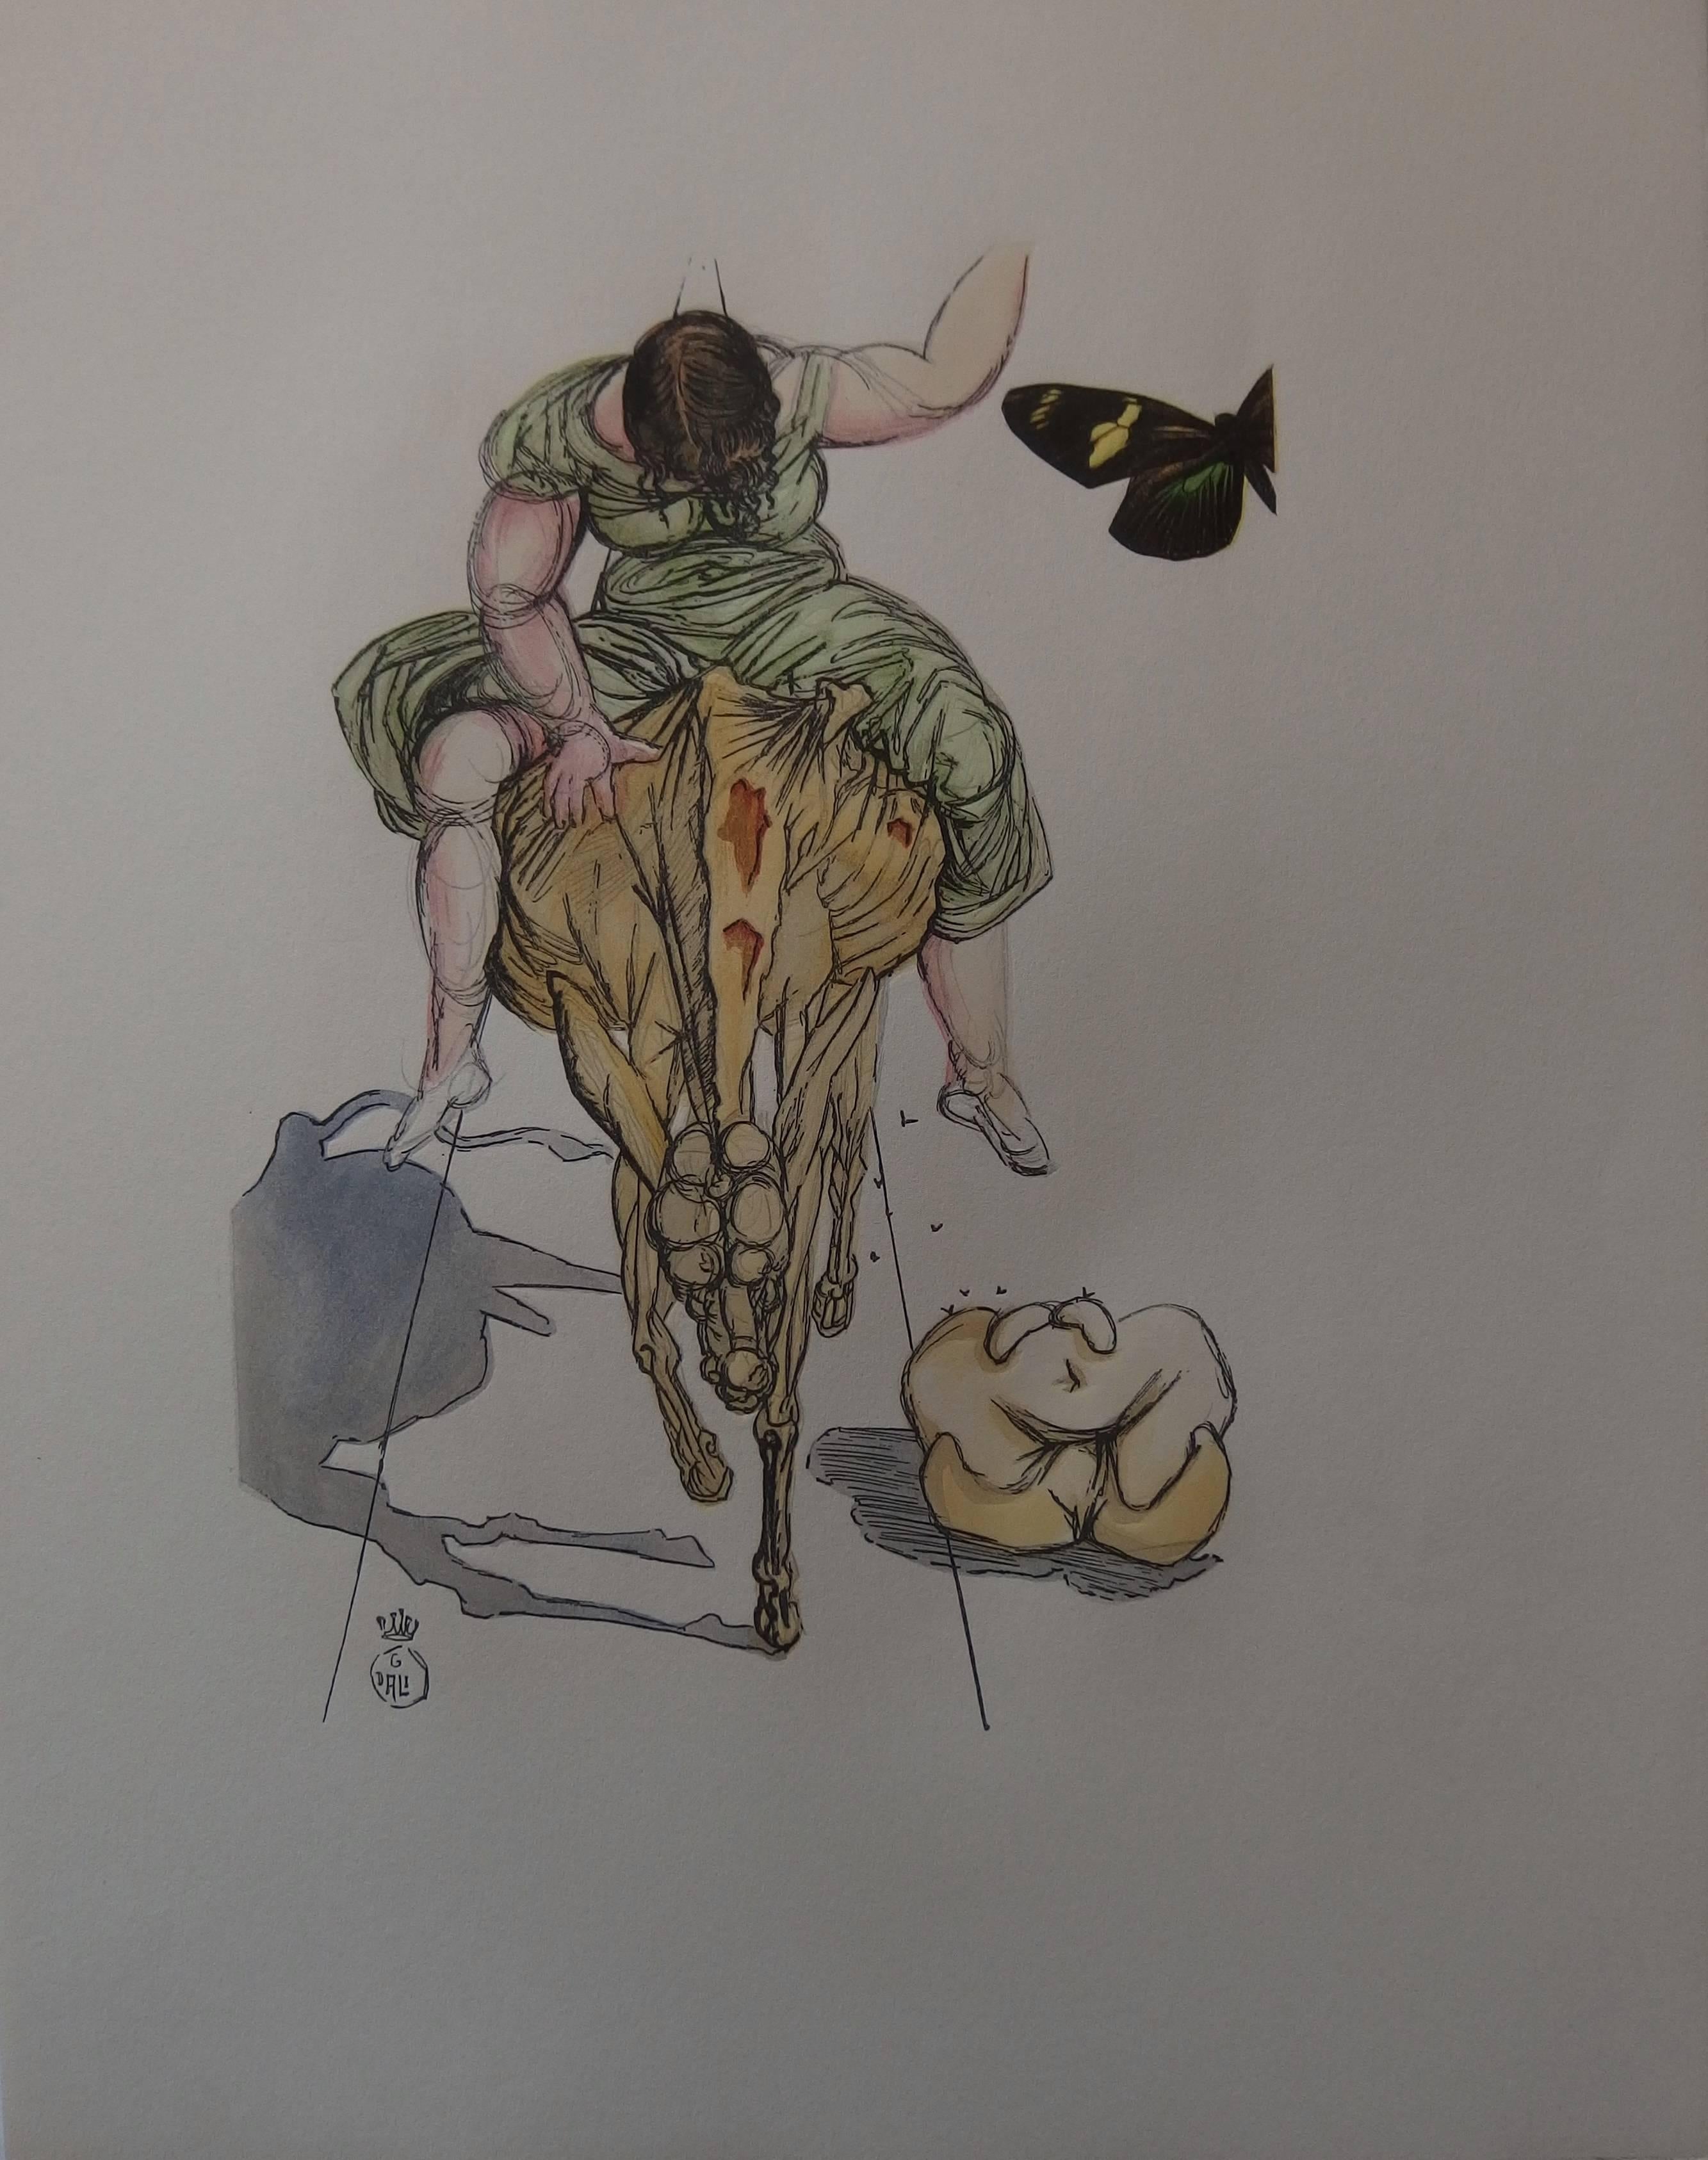 Salvador Dalí Figurative Print - Tricorne : On the Donkey with Butterfly - Original signed woodcut - 1959